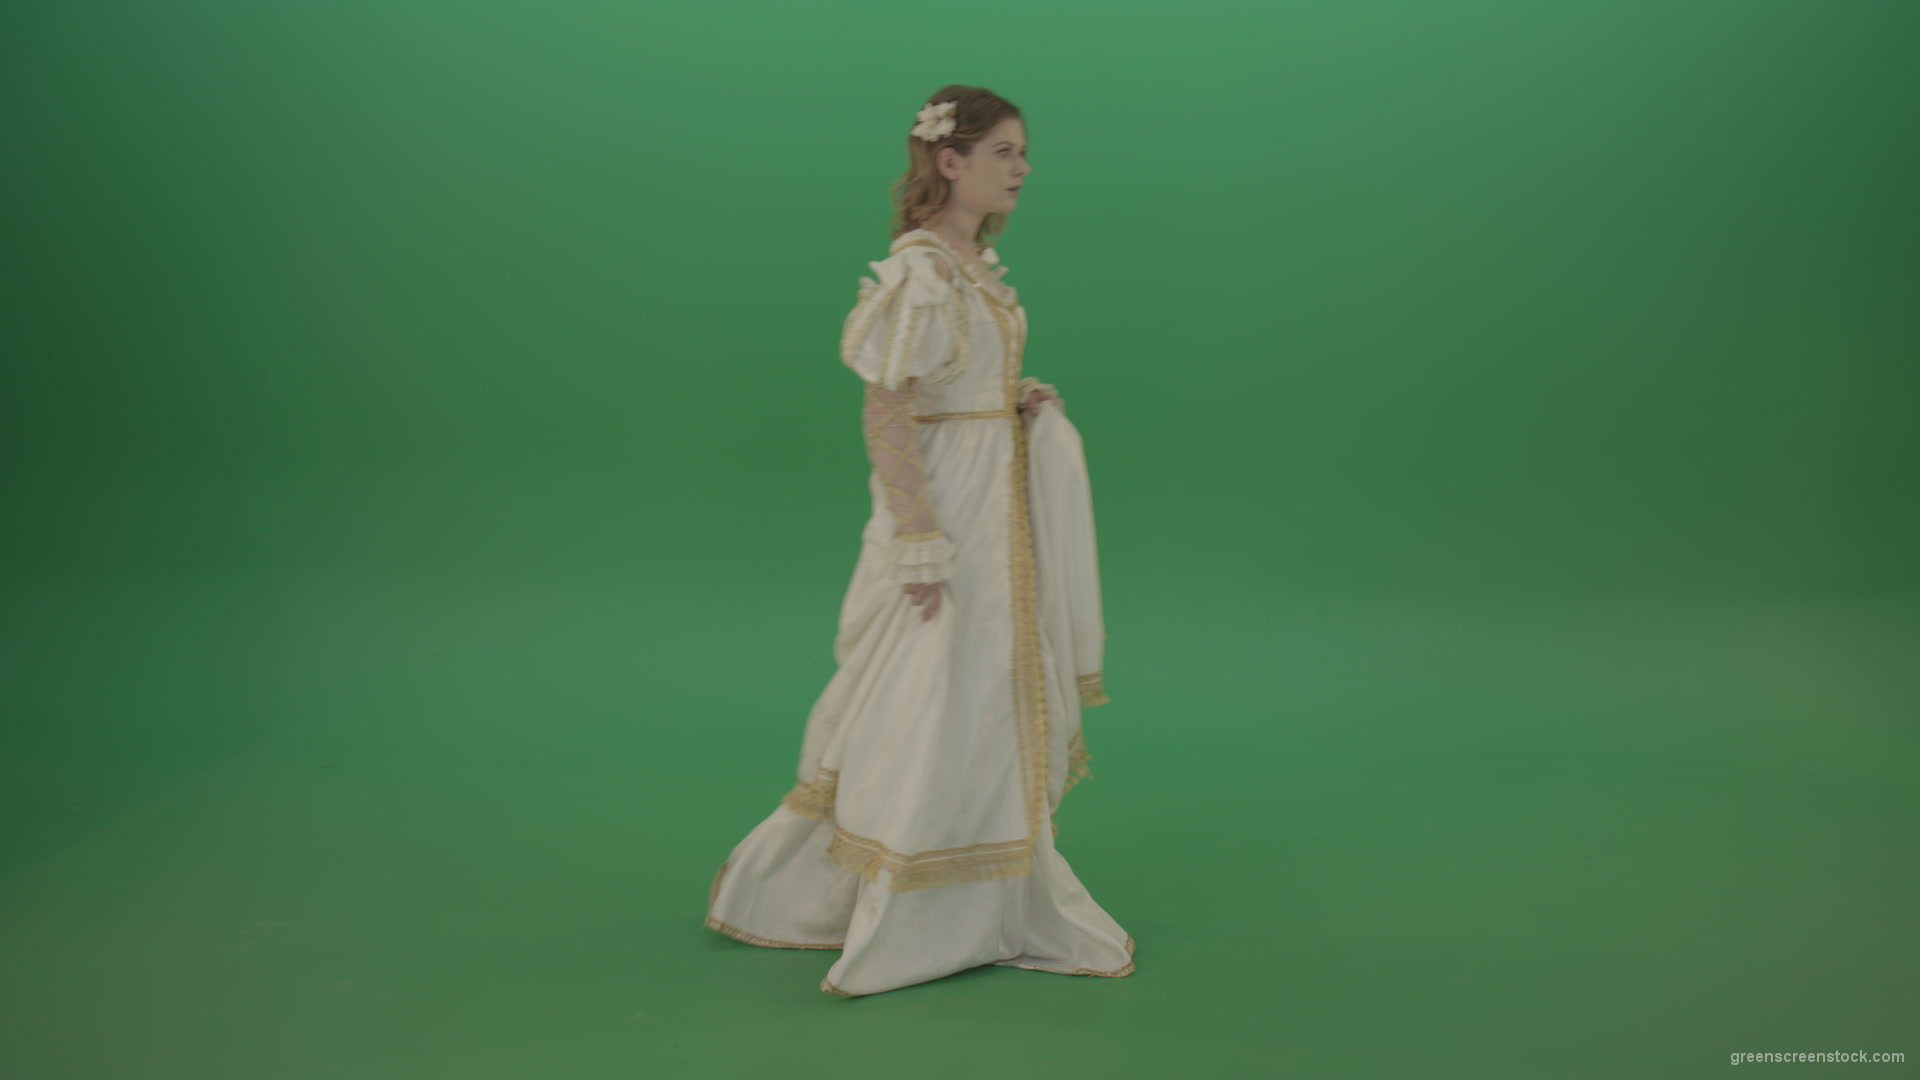 Mysterious-princess-makes-a-white-dress-goes-aside-isolated-on-green-background_005 Green Screen Stock